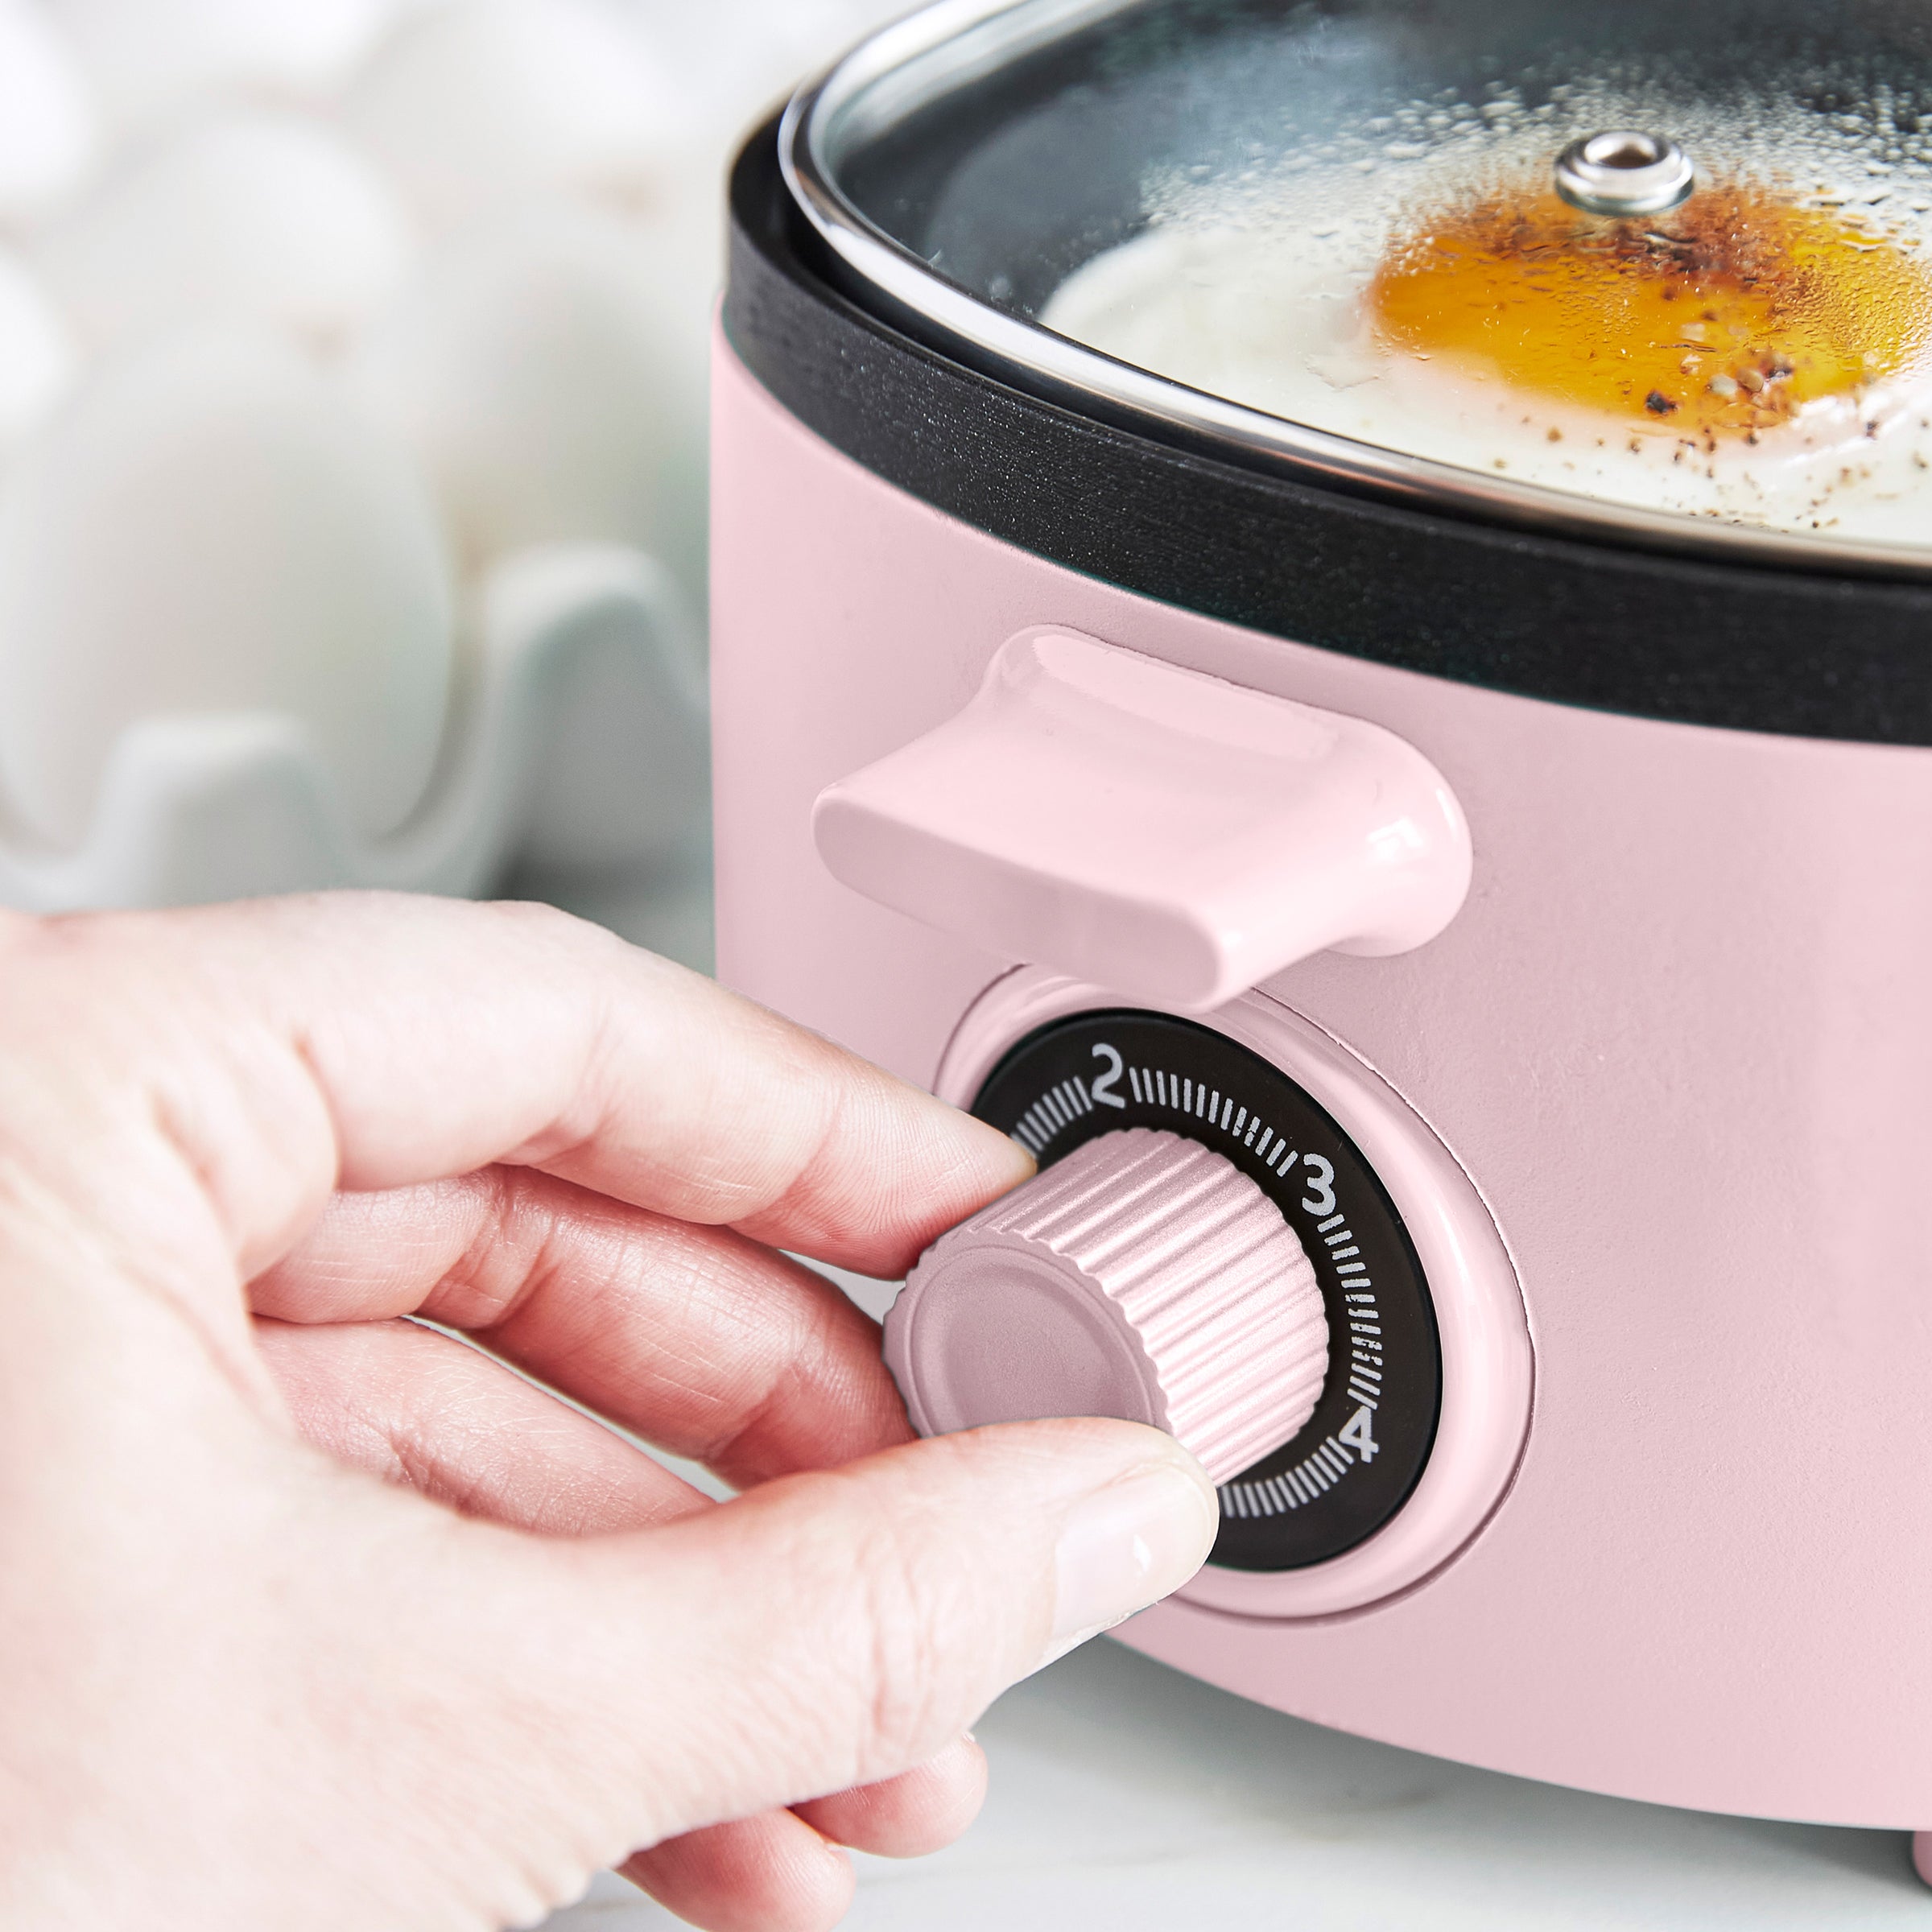 The 3-in-1 Multi-function Breakfast Maker Machine that your Home Appliance  Clients need this